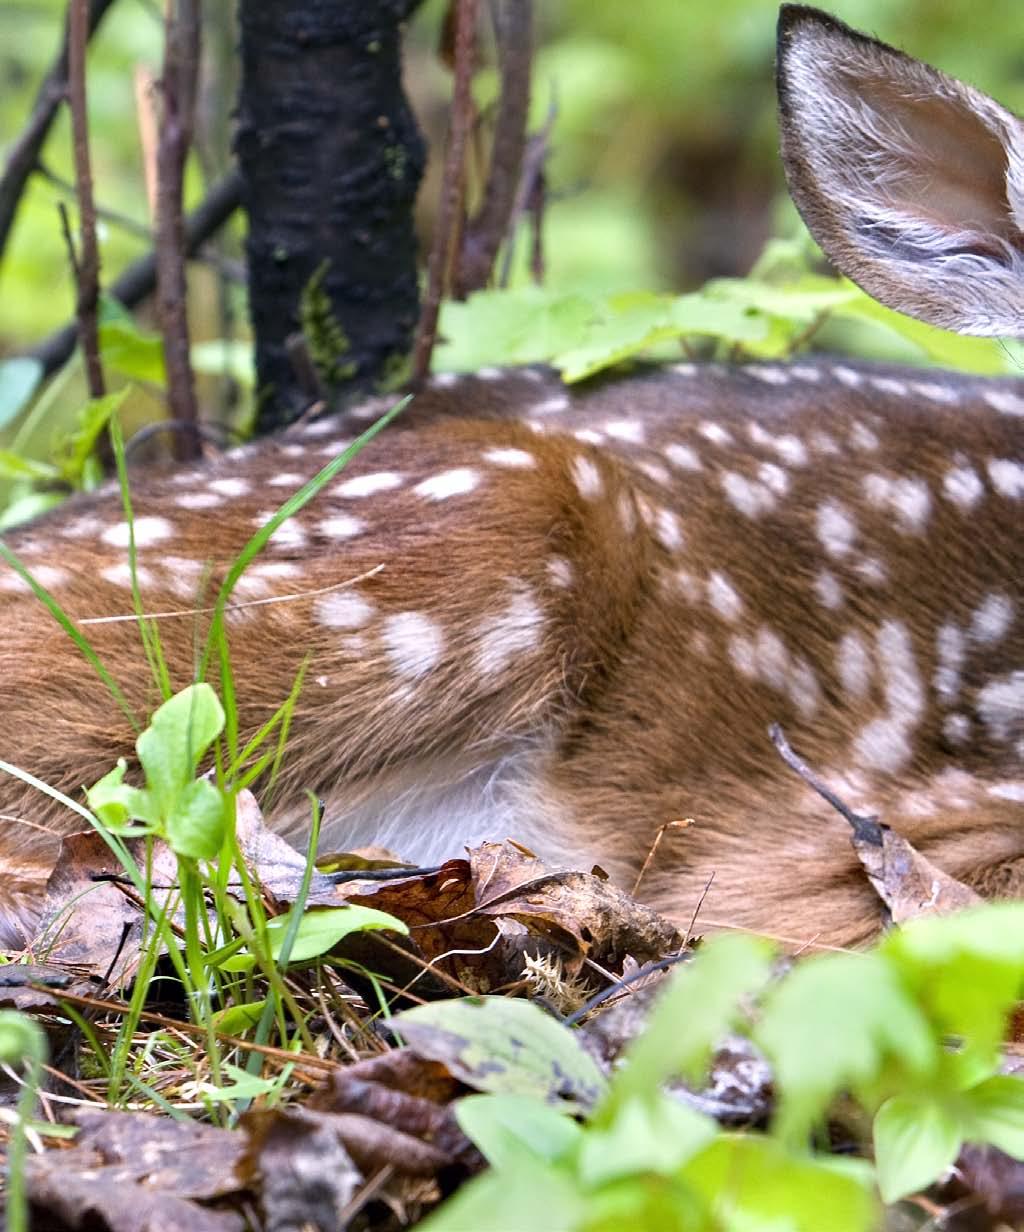 Fawns that appear abandoned have most likely been left